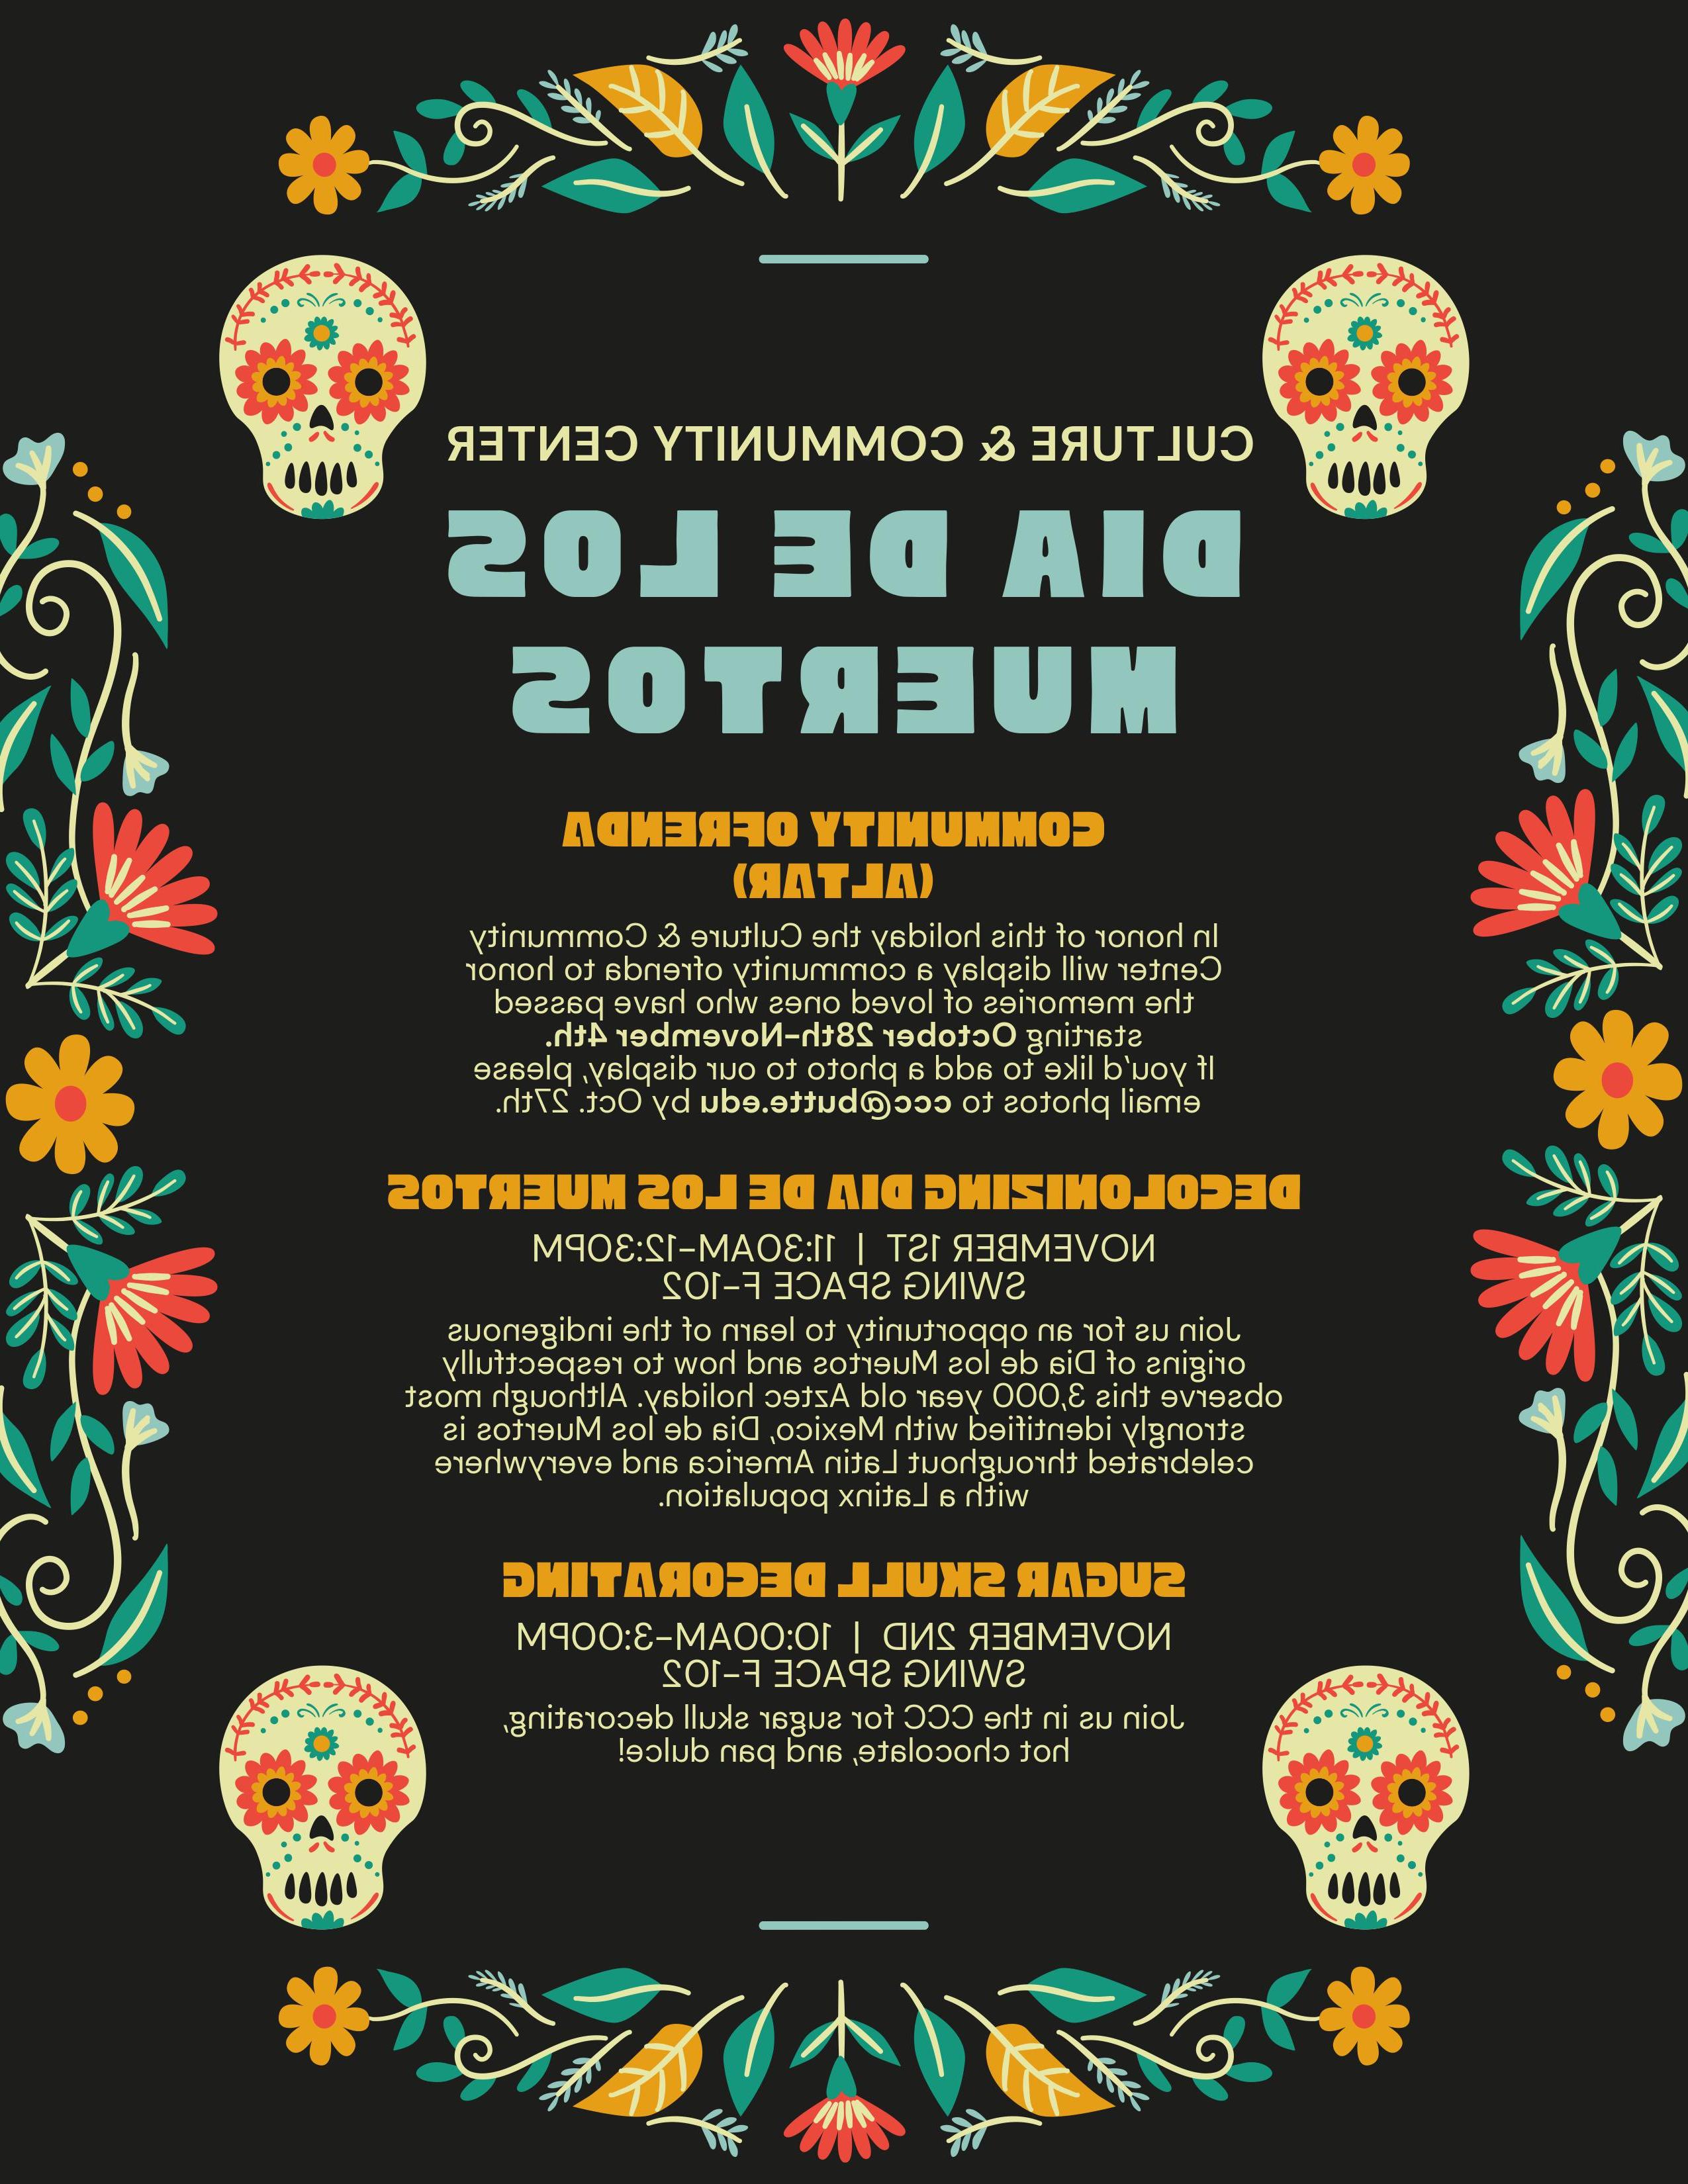 a graphivc featuring sugar skulls and names and times of events as described in press release